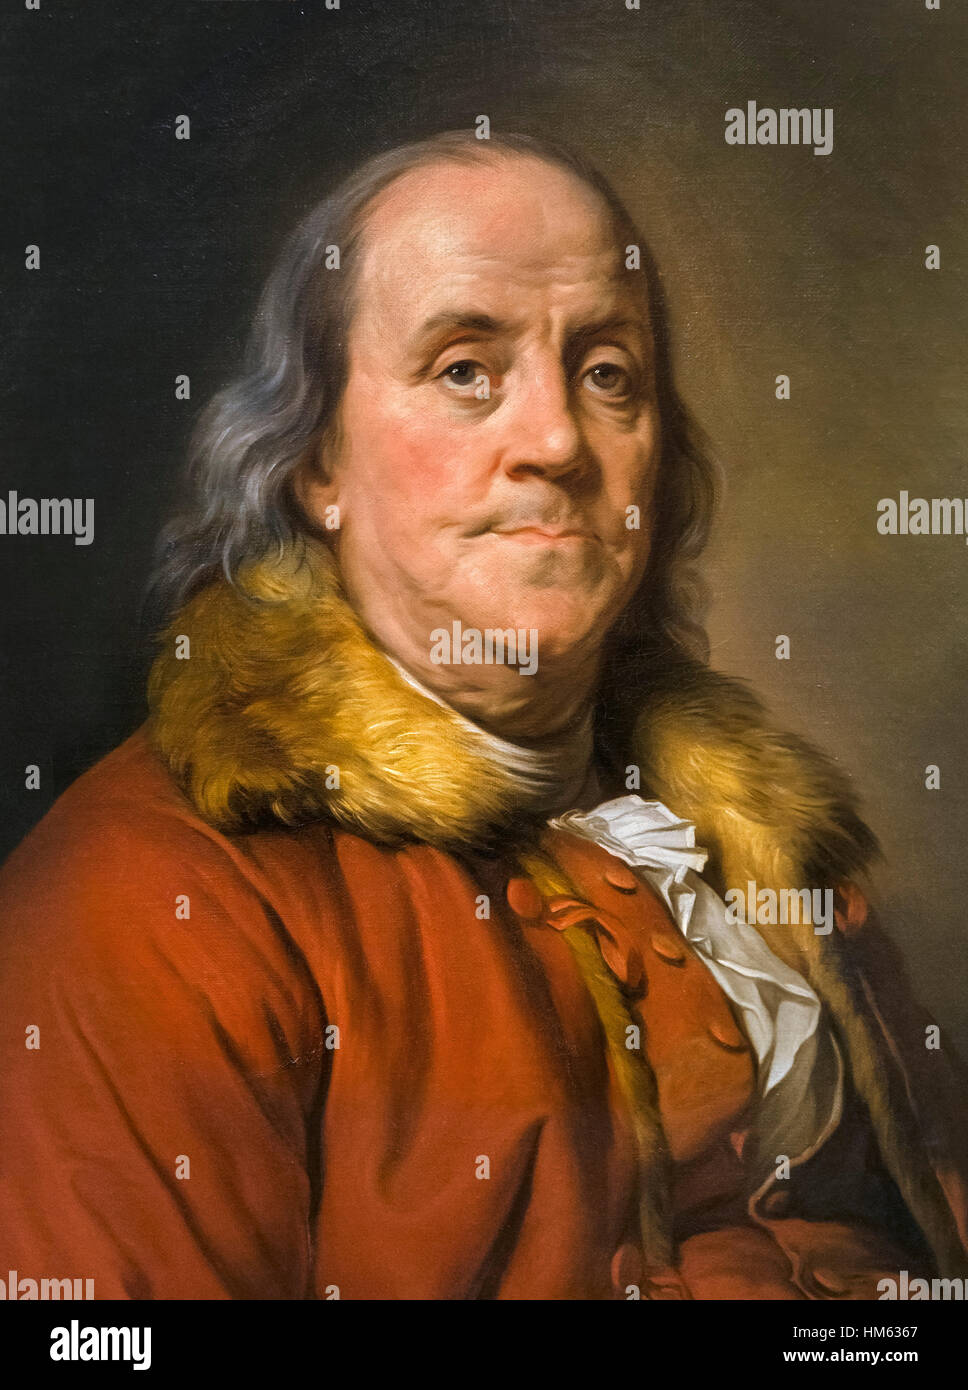 Benjamin Franklin. Portrait by Duplessis - The Fur Collar Portrait - oil on canvas, 1778 Stock Photo